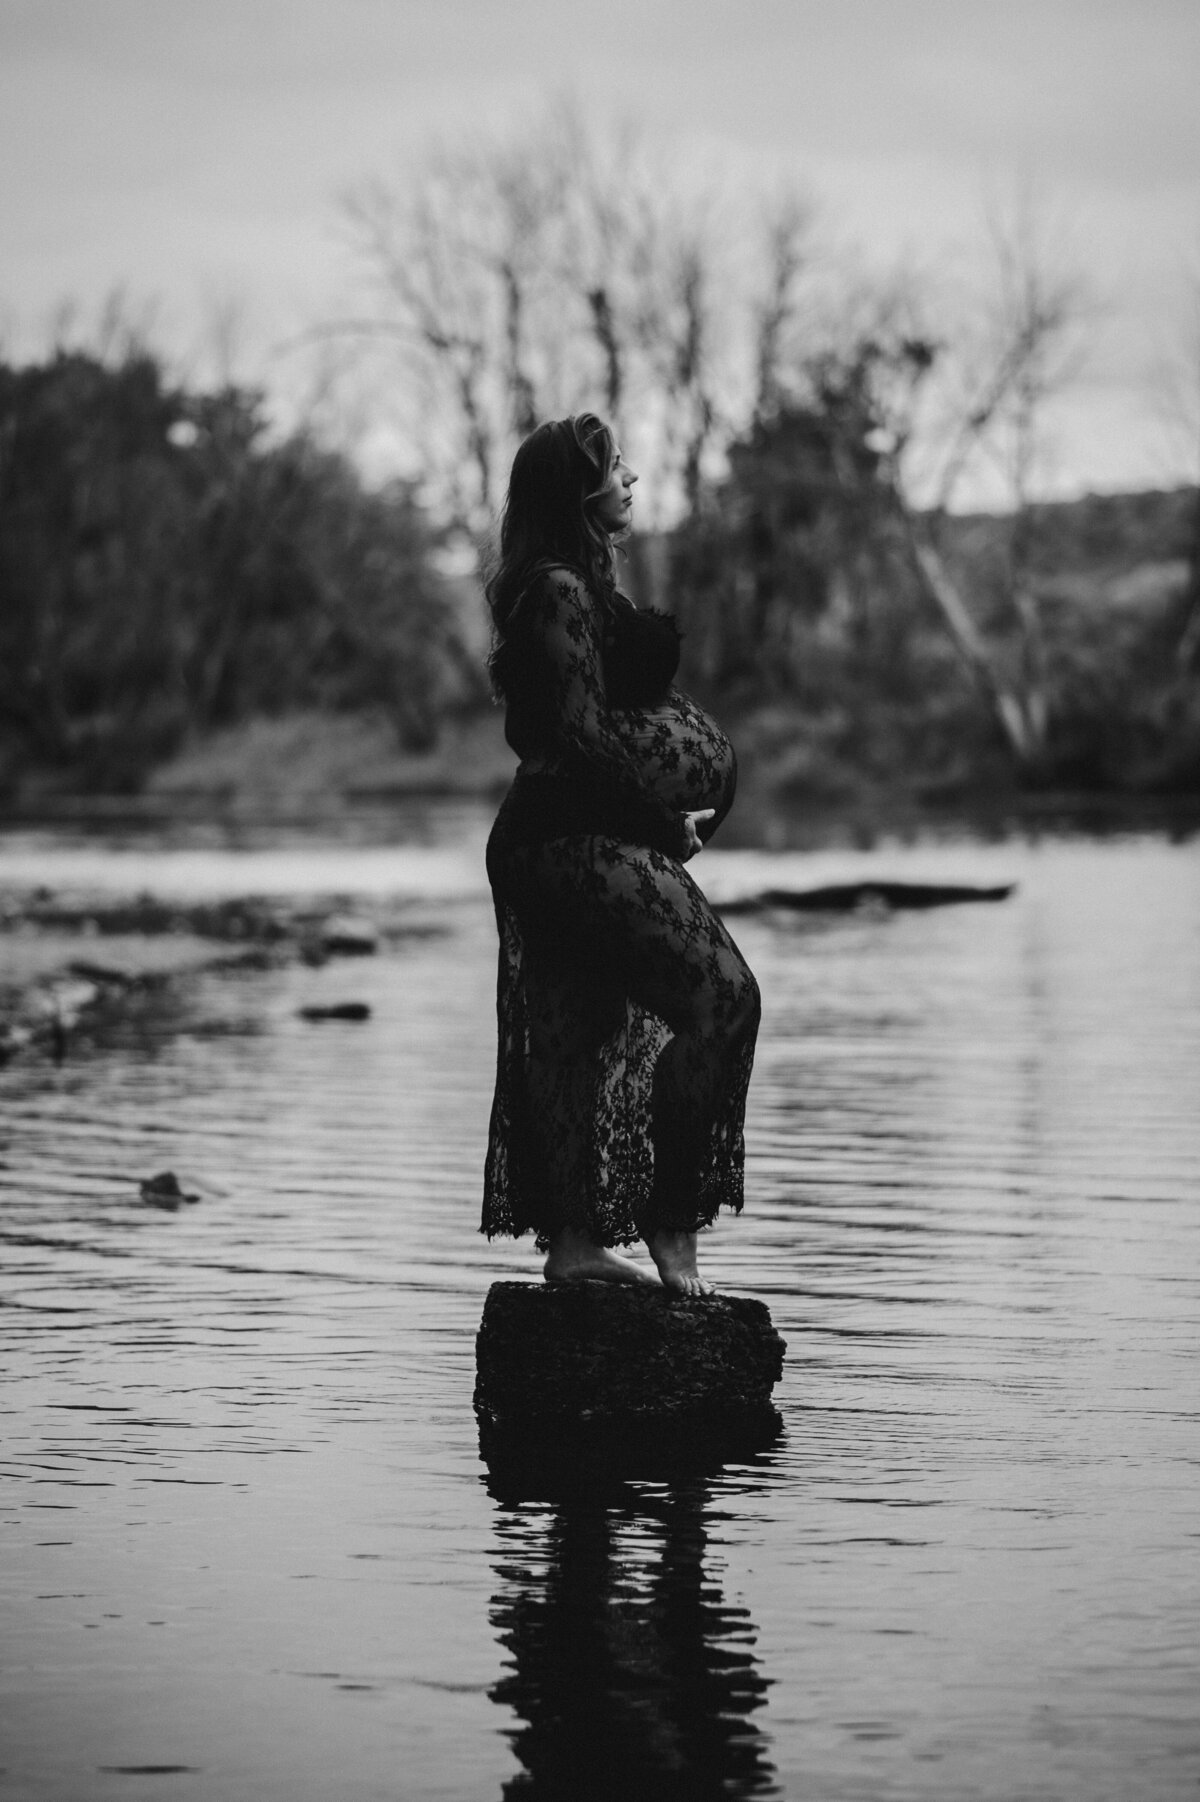 Radiate by the riverside with maternity portraits along Minneapolis waterways. Shannon Kathleen Photography captures the radiant beauty of your maternal journey.